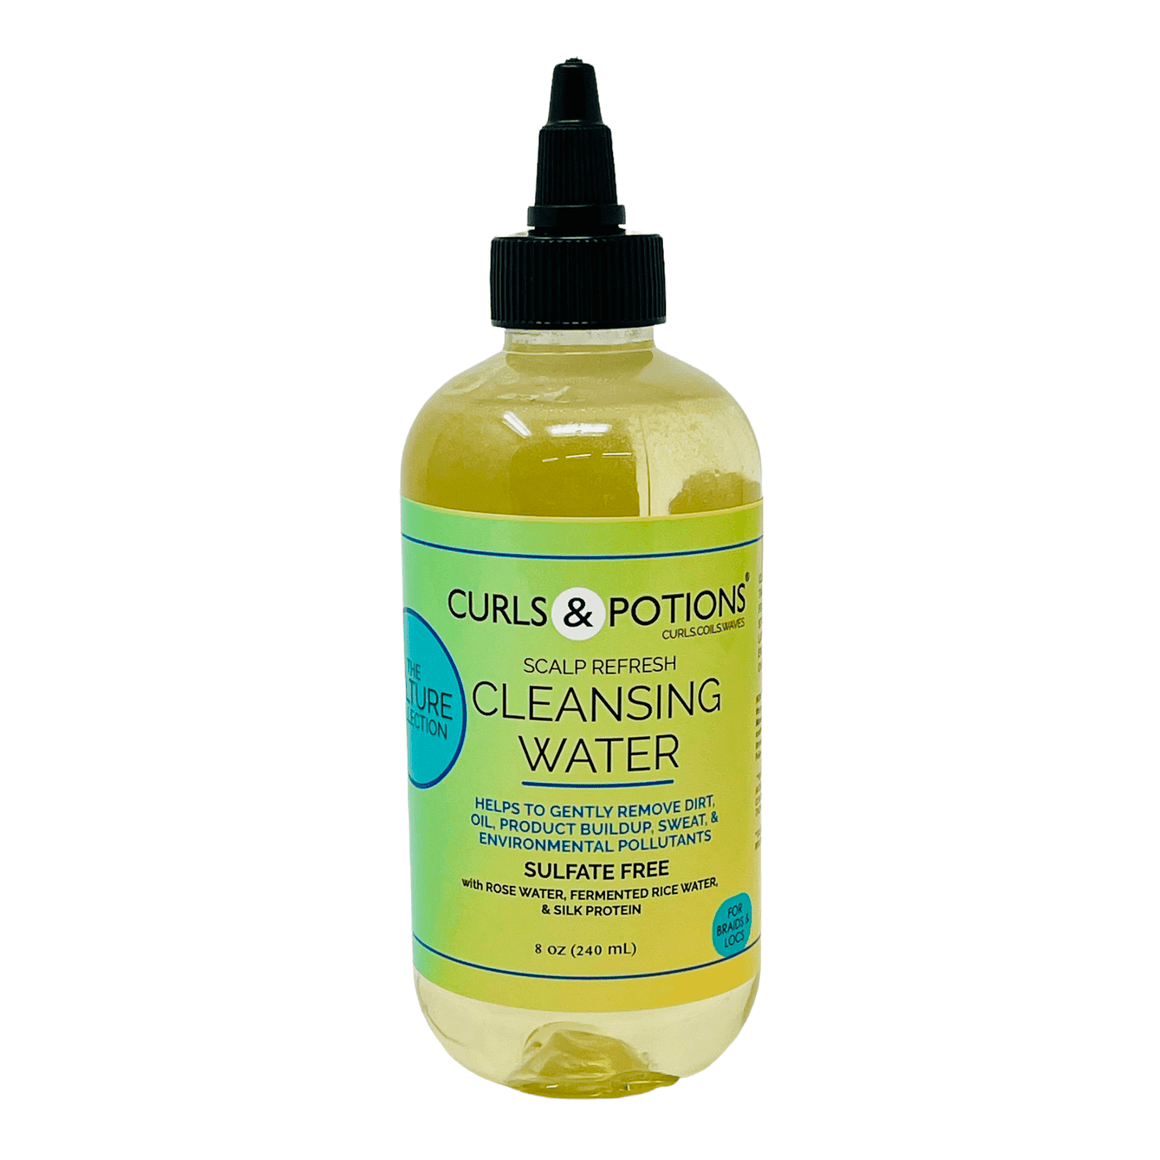 Scalp Refresh Cleansing Water